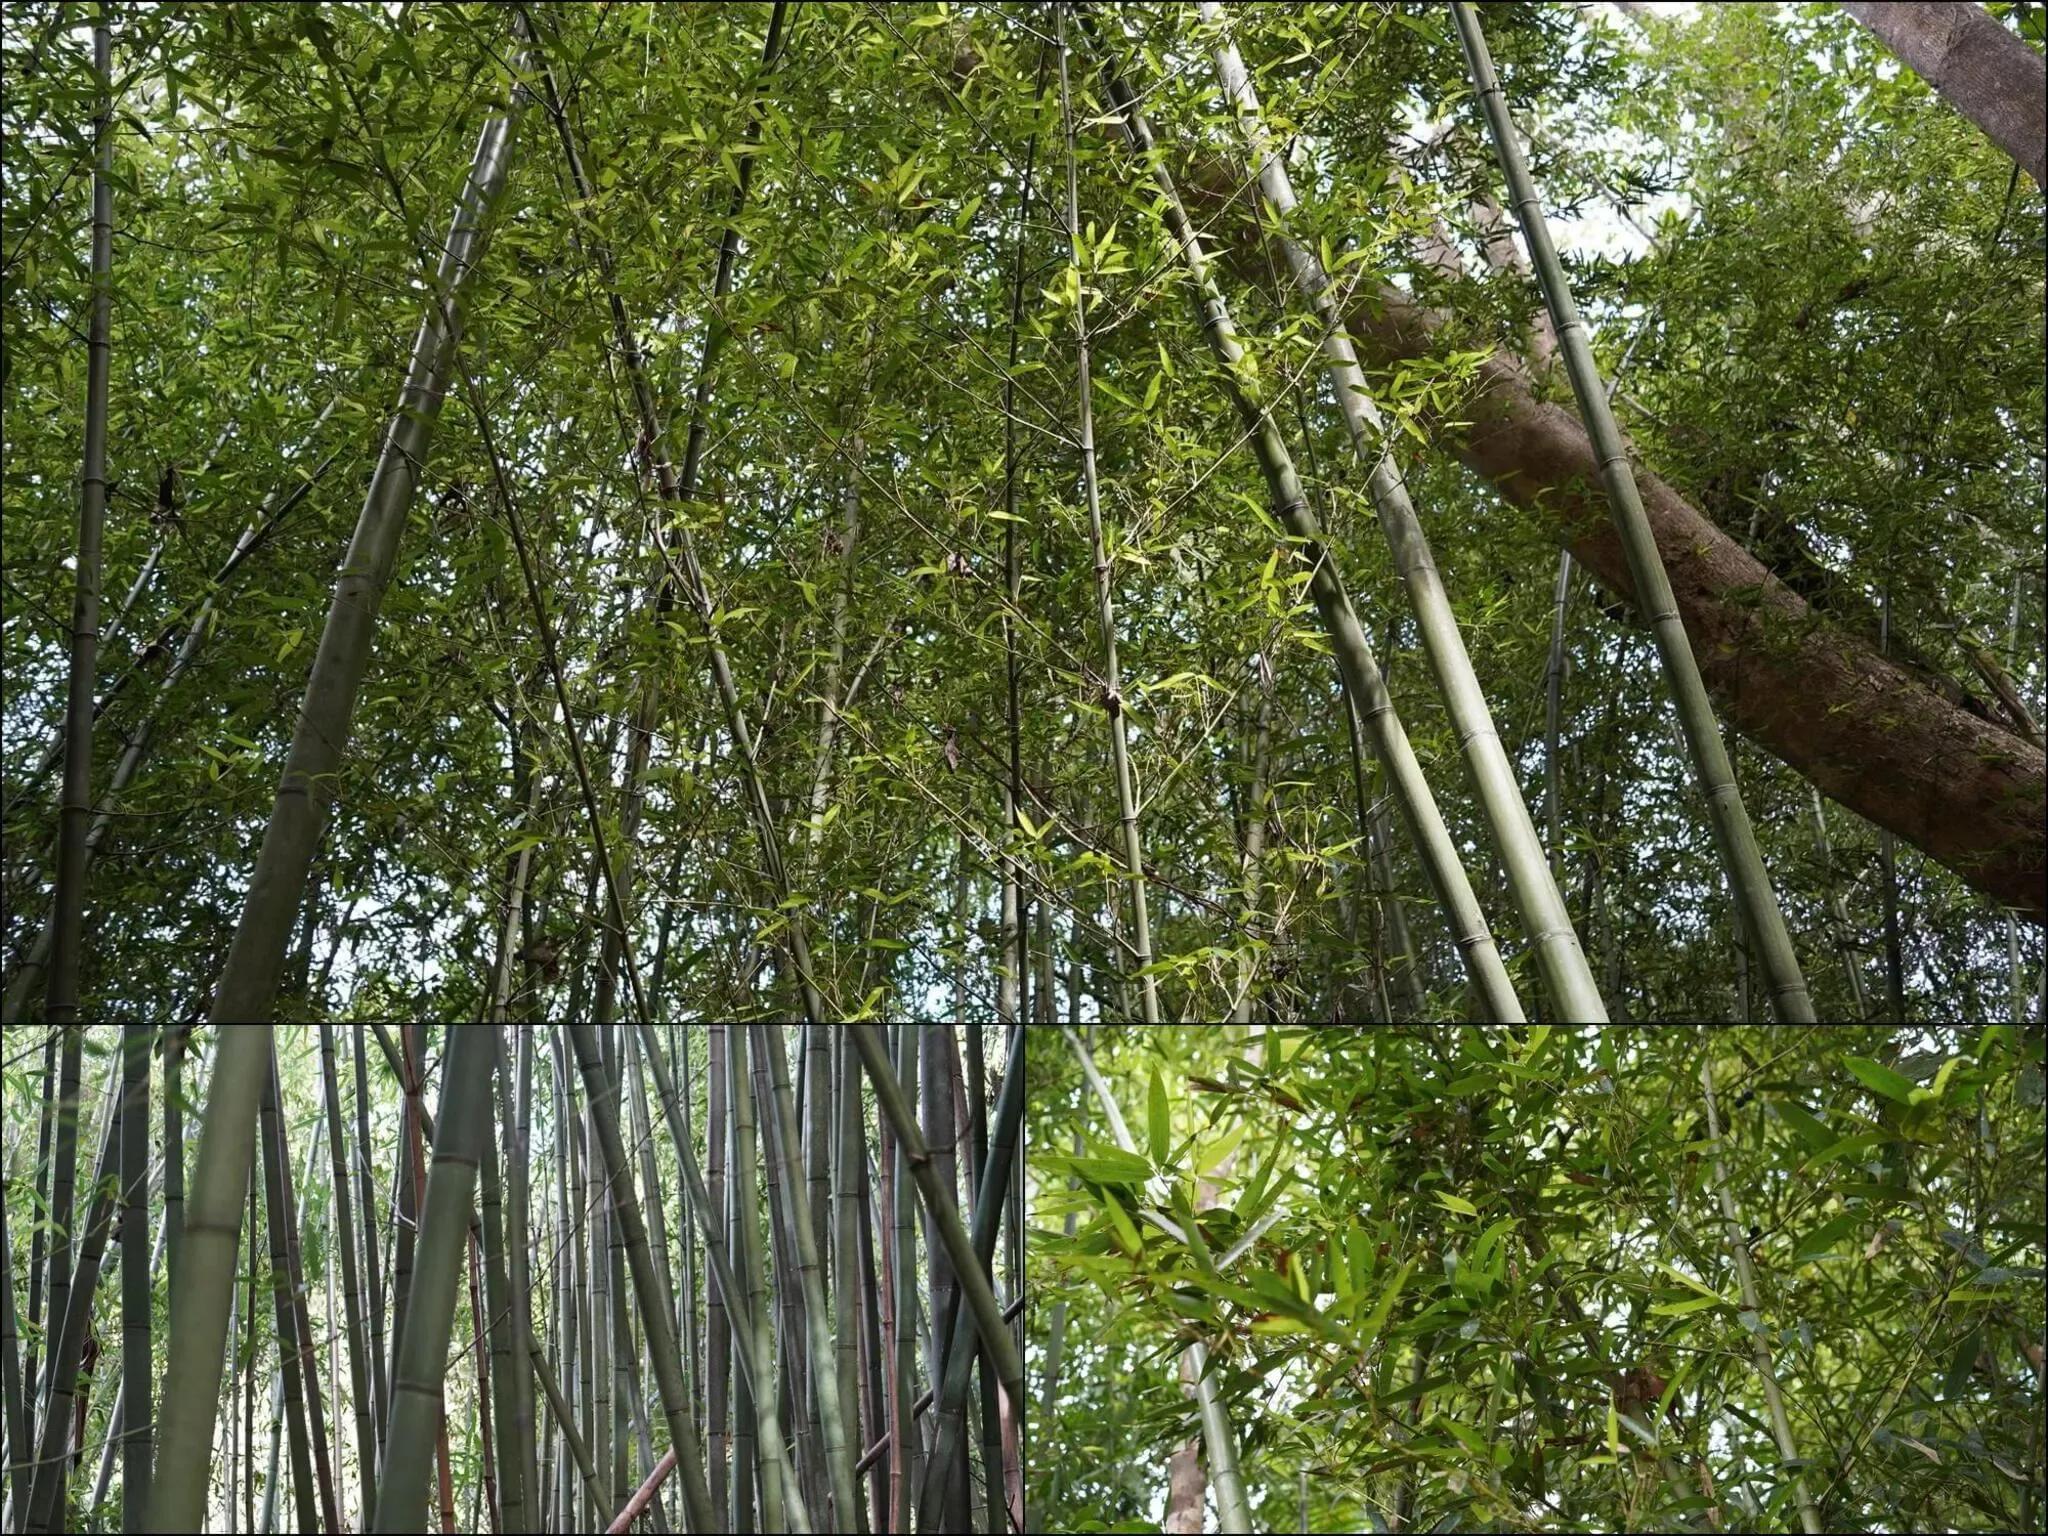 170 photos of Bamboo Forest